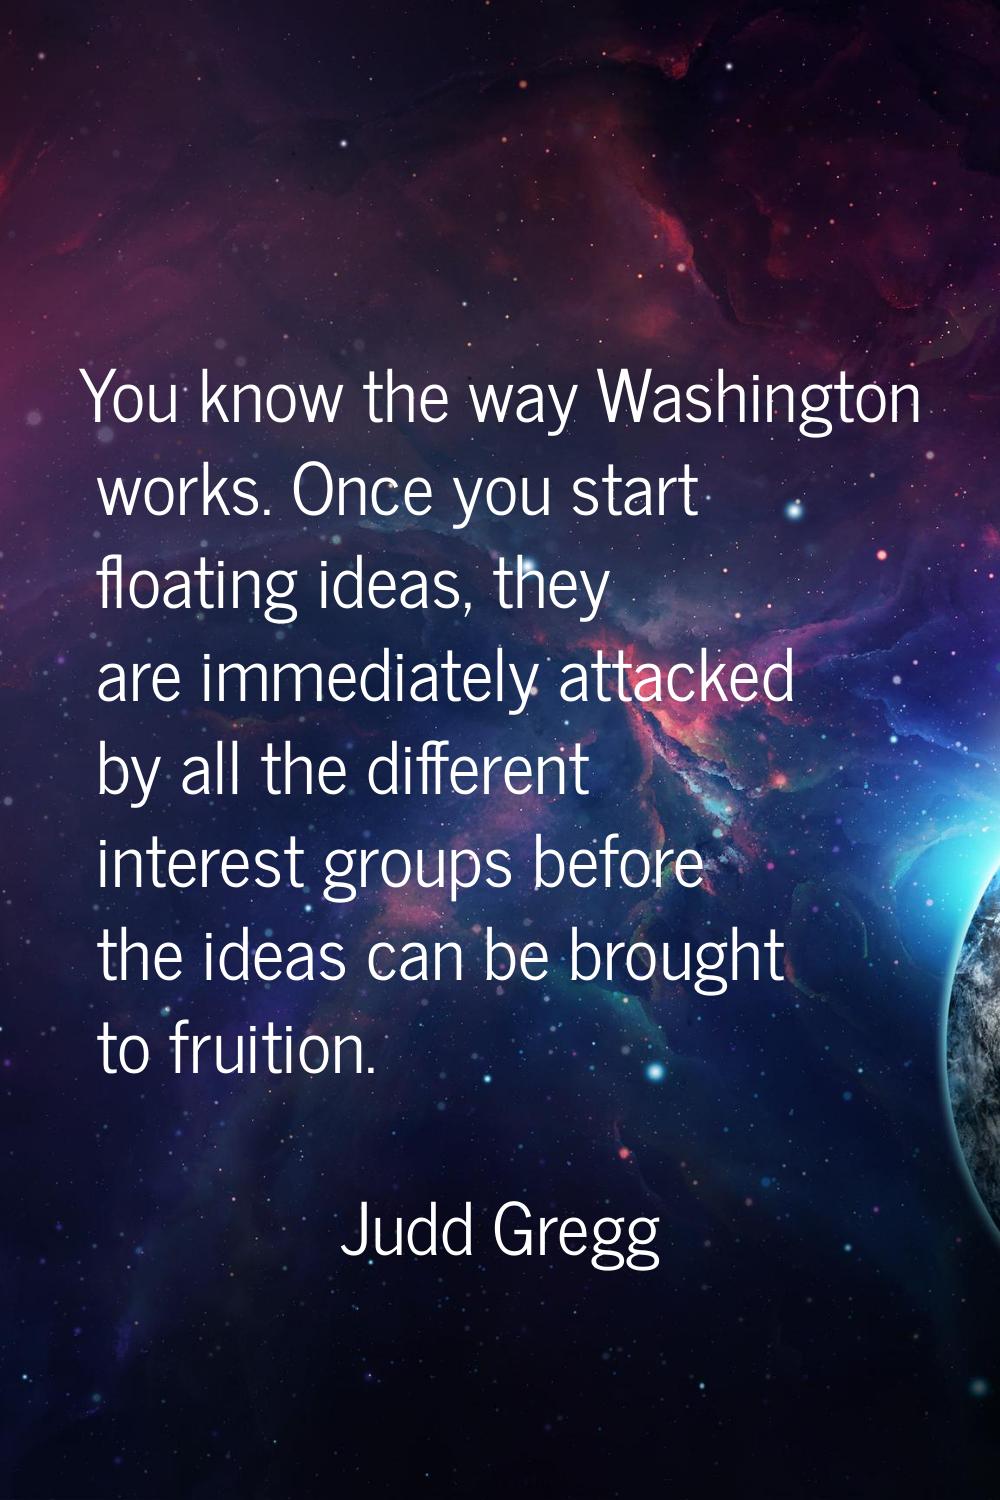 You know the way Washington works. Once you start floating ideas, they are immediately attacked by 